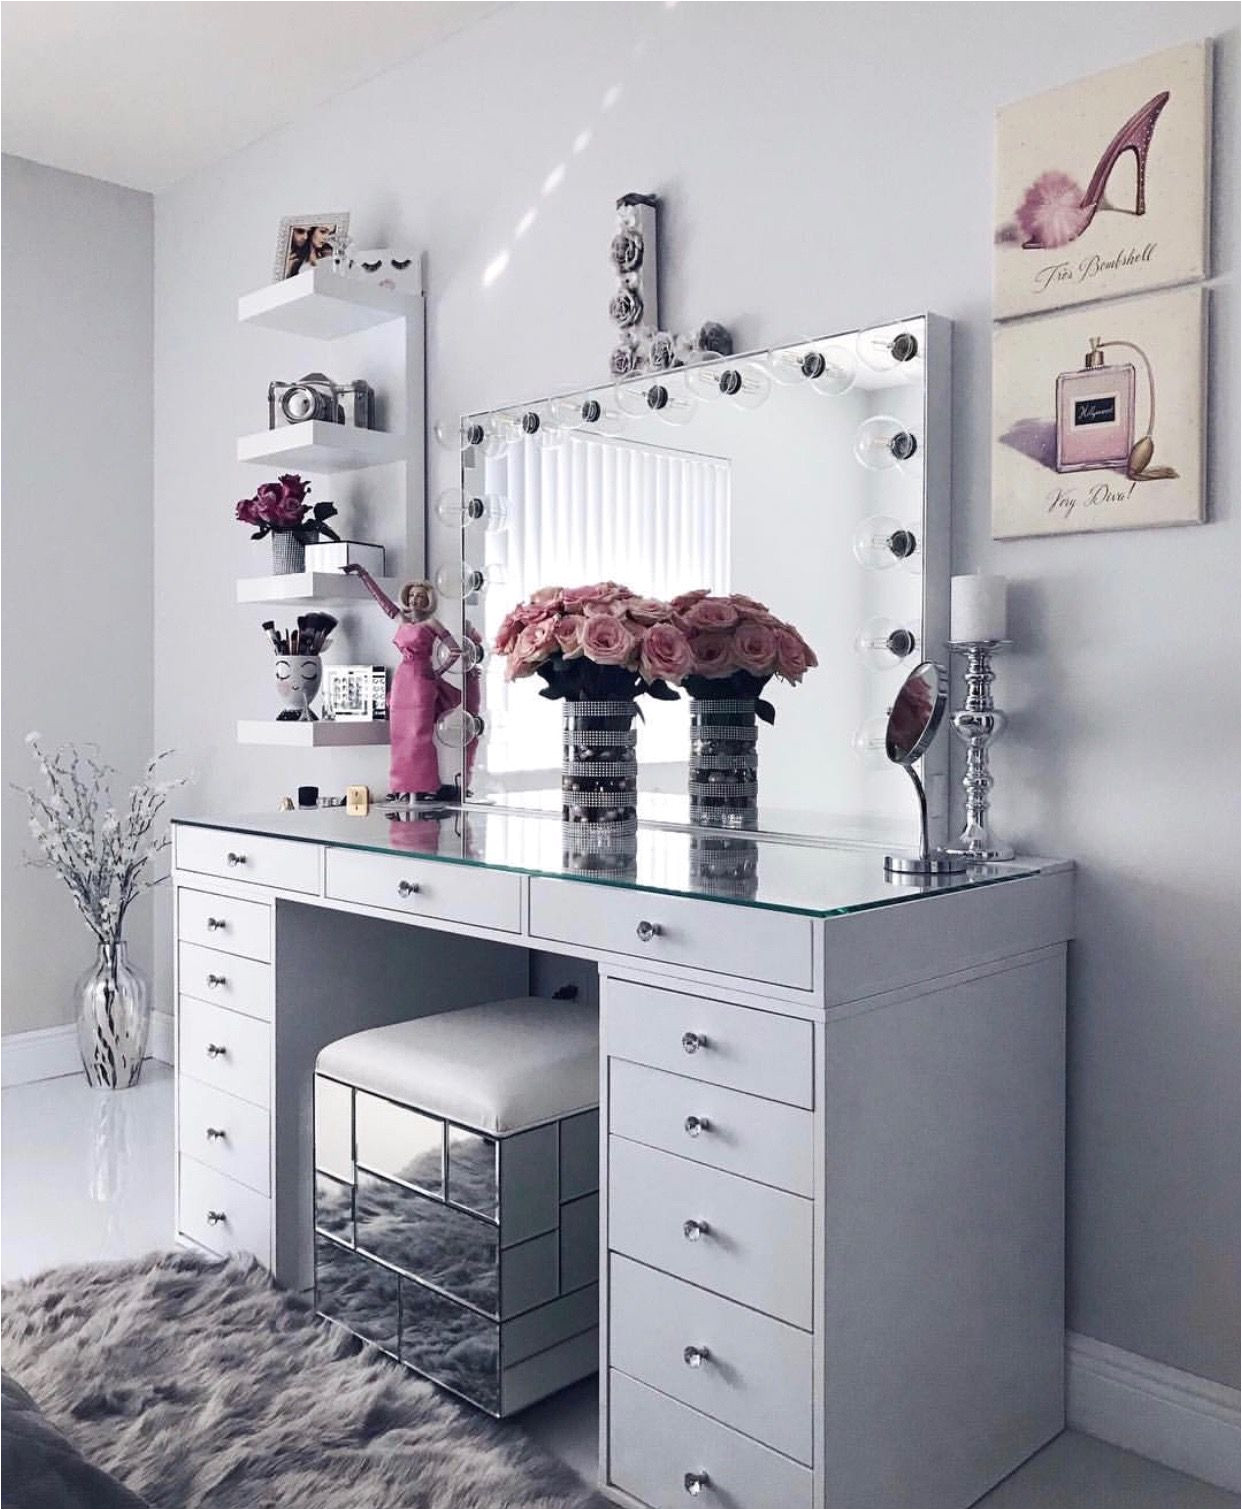 white clean sleek vanity decor paintings flowers glass furniture perfect idea for smaller apartments